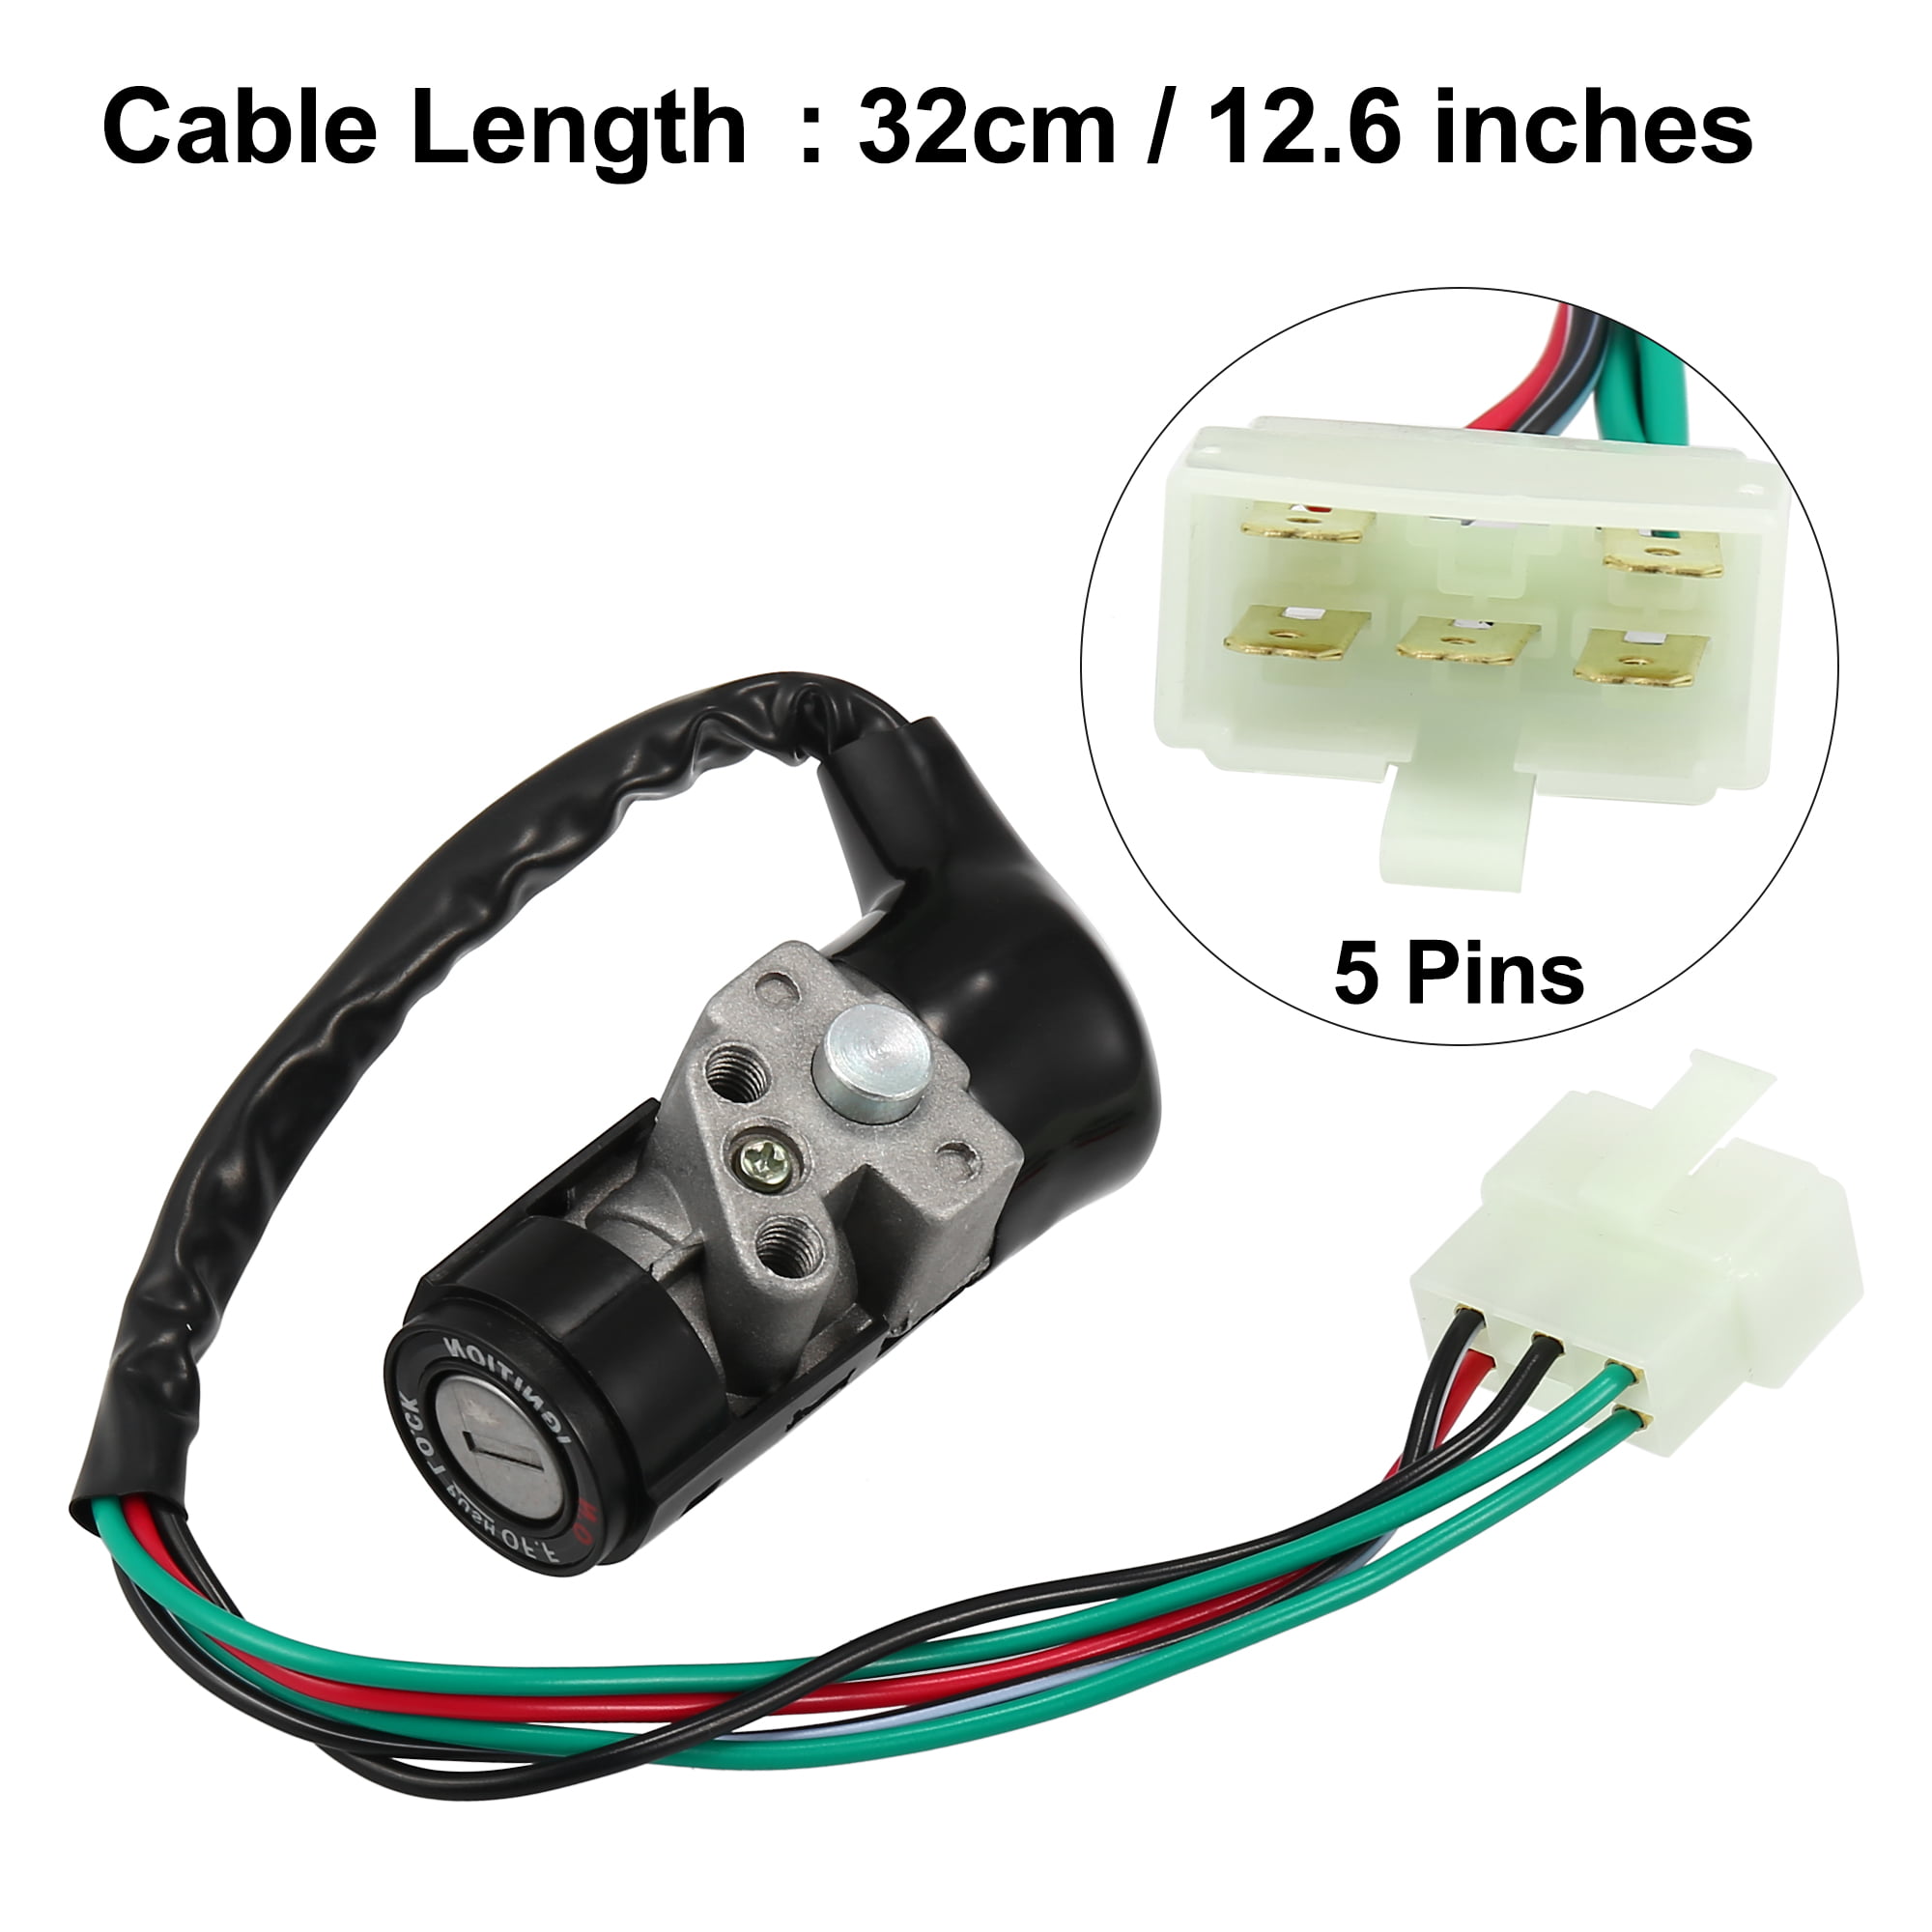 Ignition Switch Lock Key 2 Wire Two Position Replacement For Universal E-Bike 